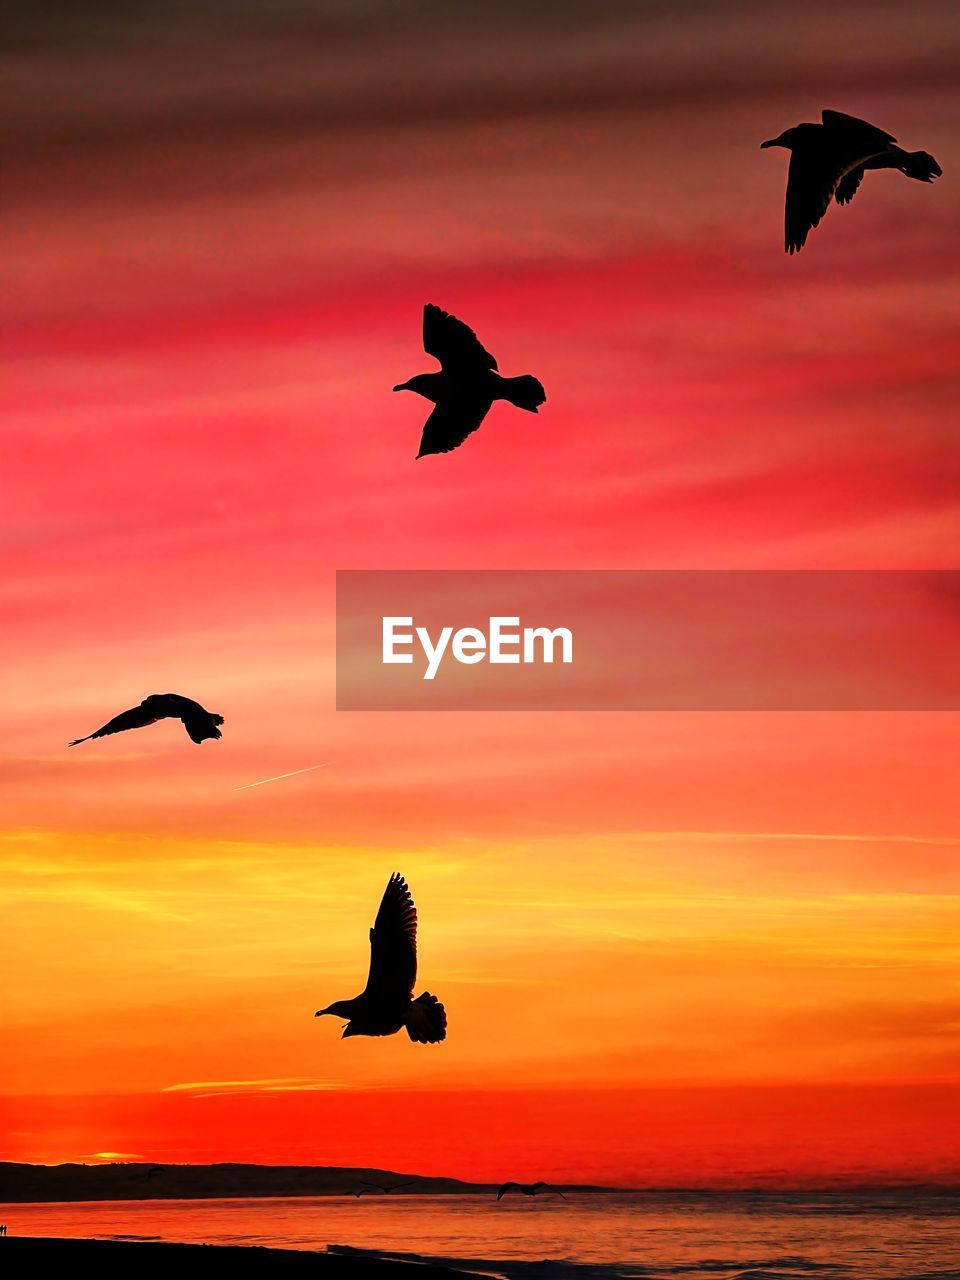 bird, animal, animal themes, flying, wildlife, animal wildlife, sunset, group of animals, sky, silhouette, nature, beauty in nature, cloud, mid-air, water, sea, dramatic sky, no people, orange color, animal body part, spread wings, outdoors, motion, two animals, scenics - nature, romantic sky, tranquility, environment, tranquil scene